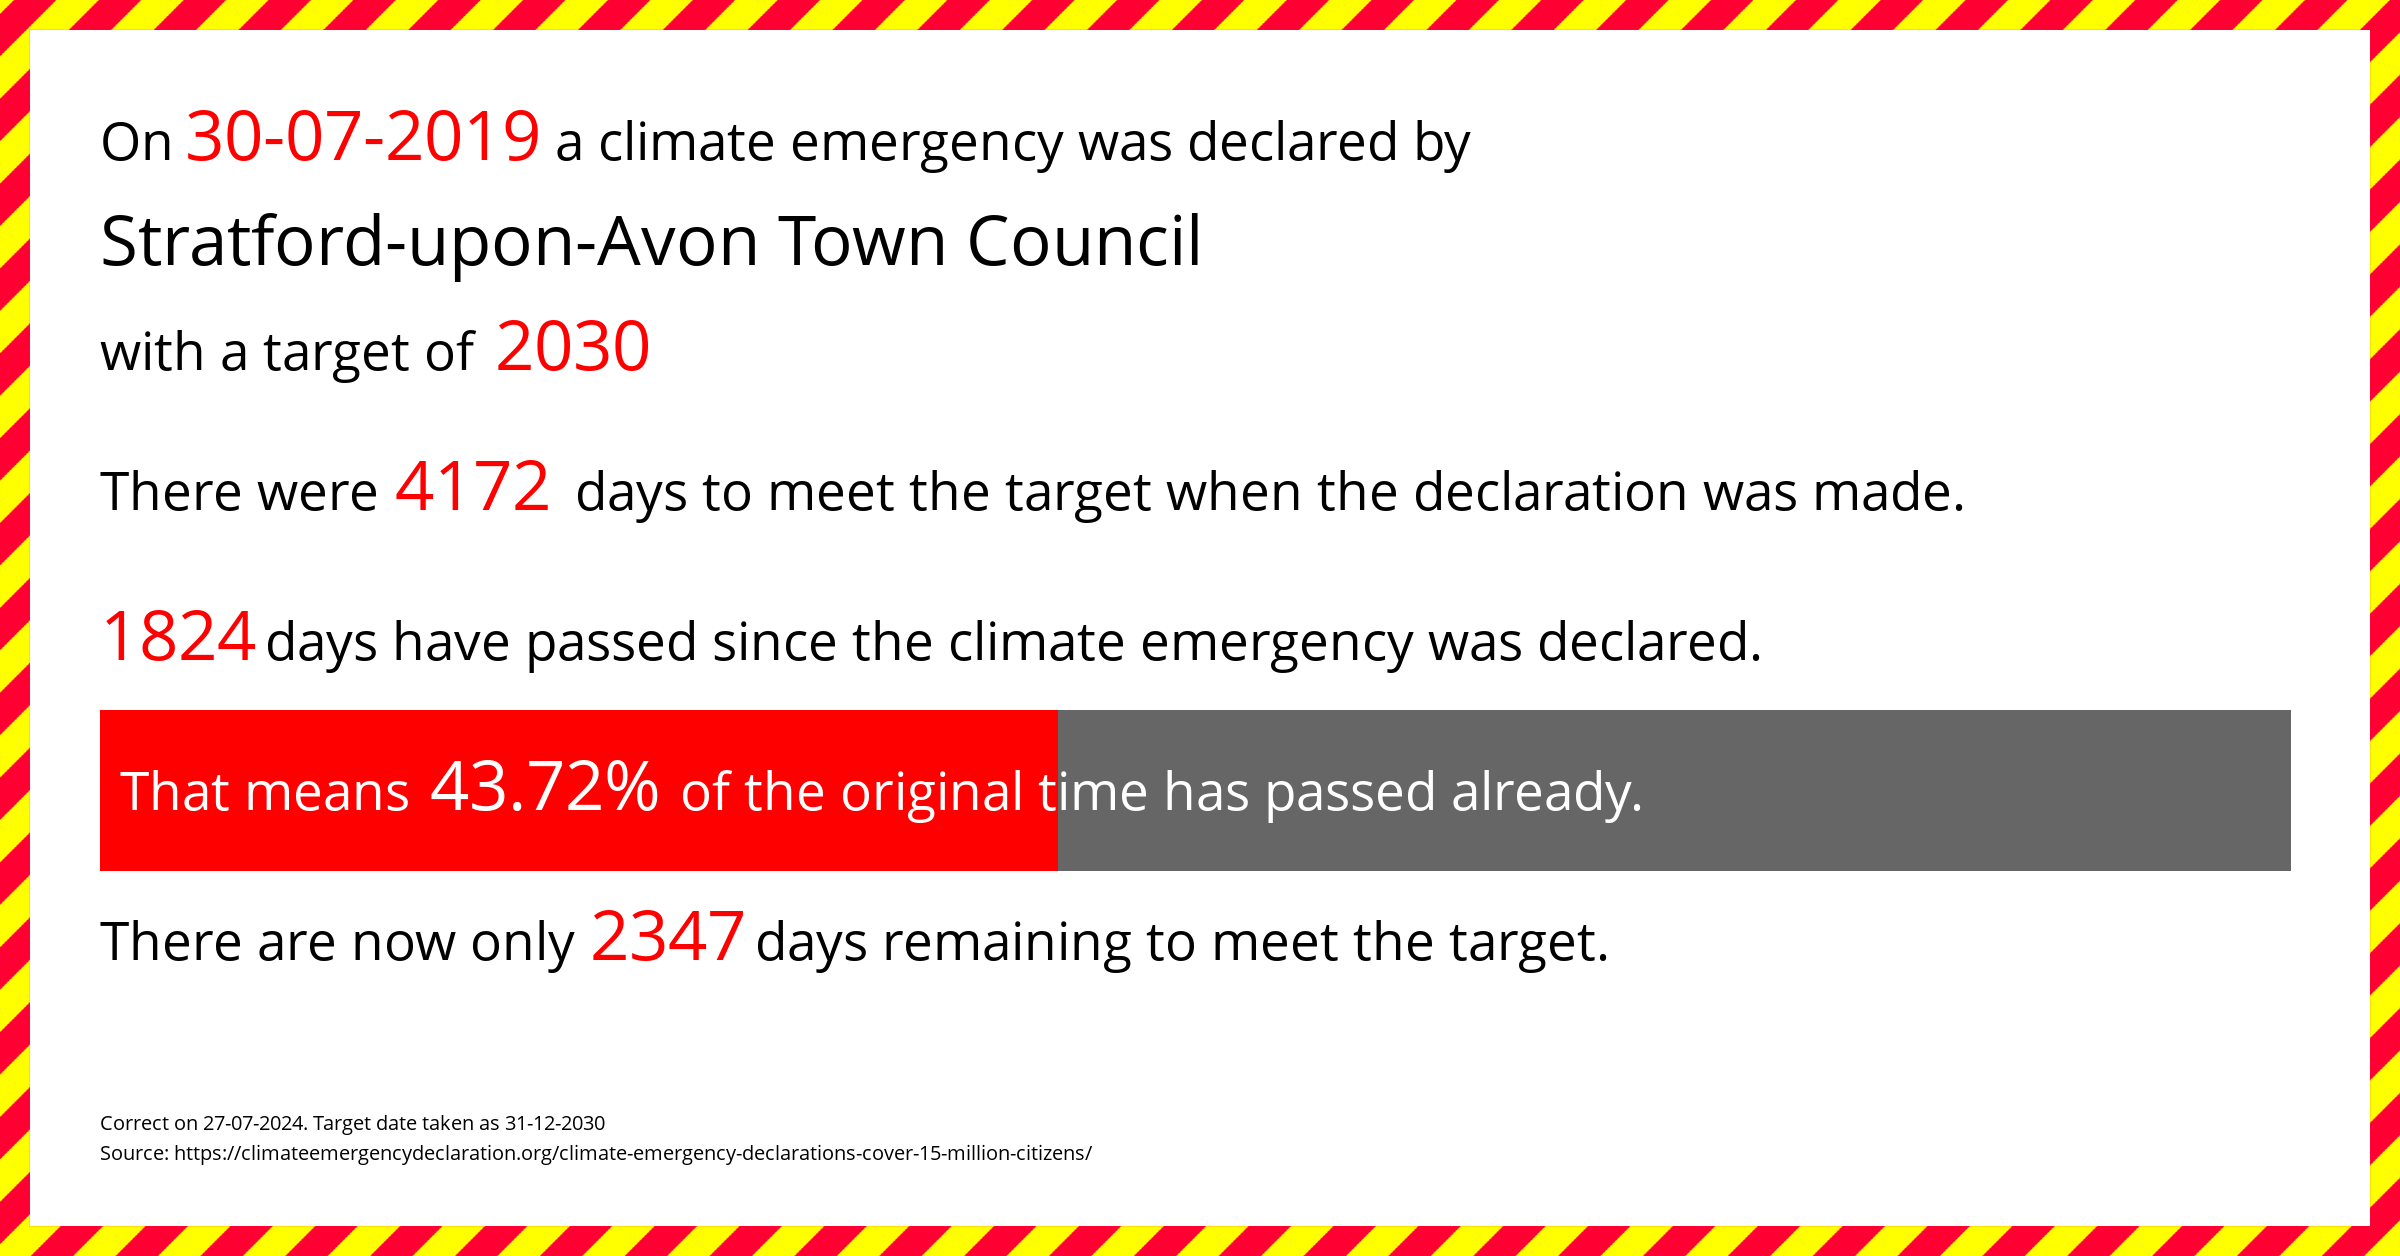 Stratford-upon-Avon Town Council declared a Climate emergency on Tuesday 30th July 2019, with a target of 2030.